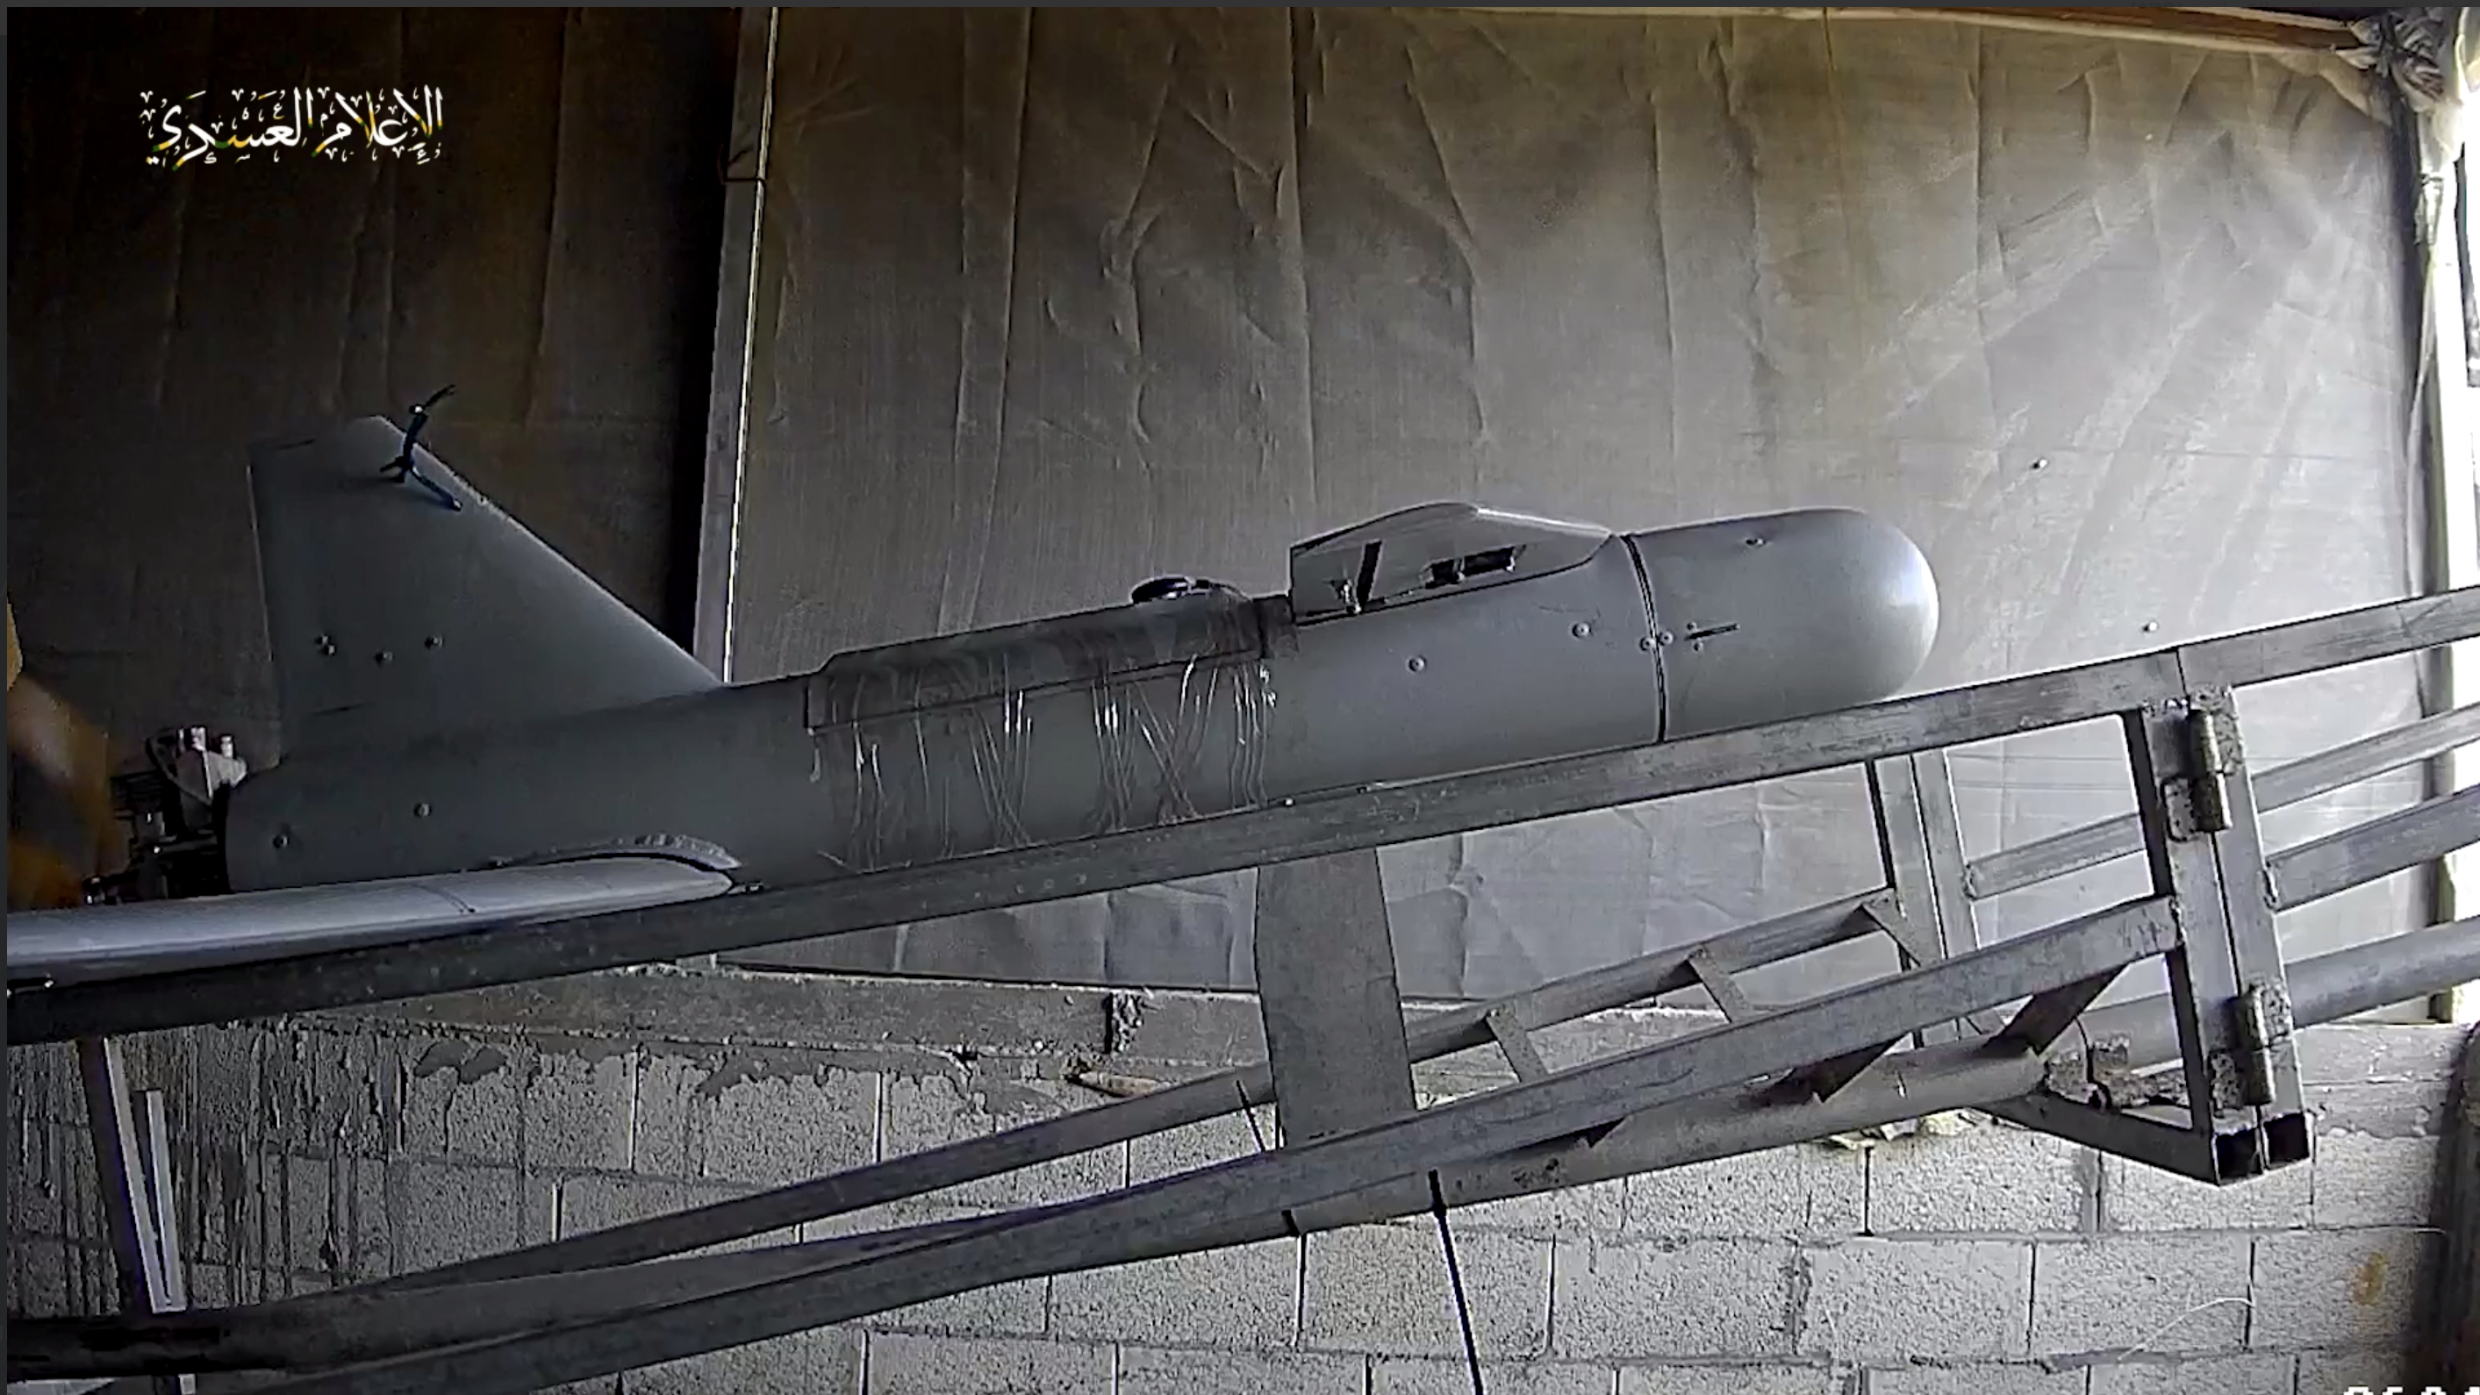 While Hamas has named this drone “Shahab”, it’s a copy of “Ababil-2”, an Iranian-made drone